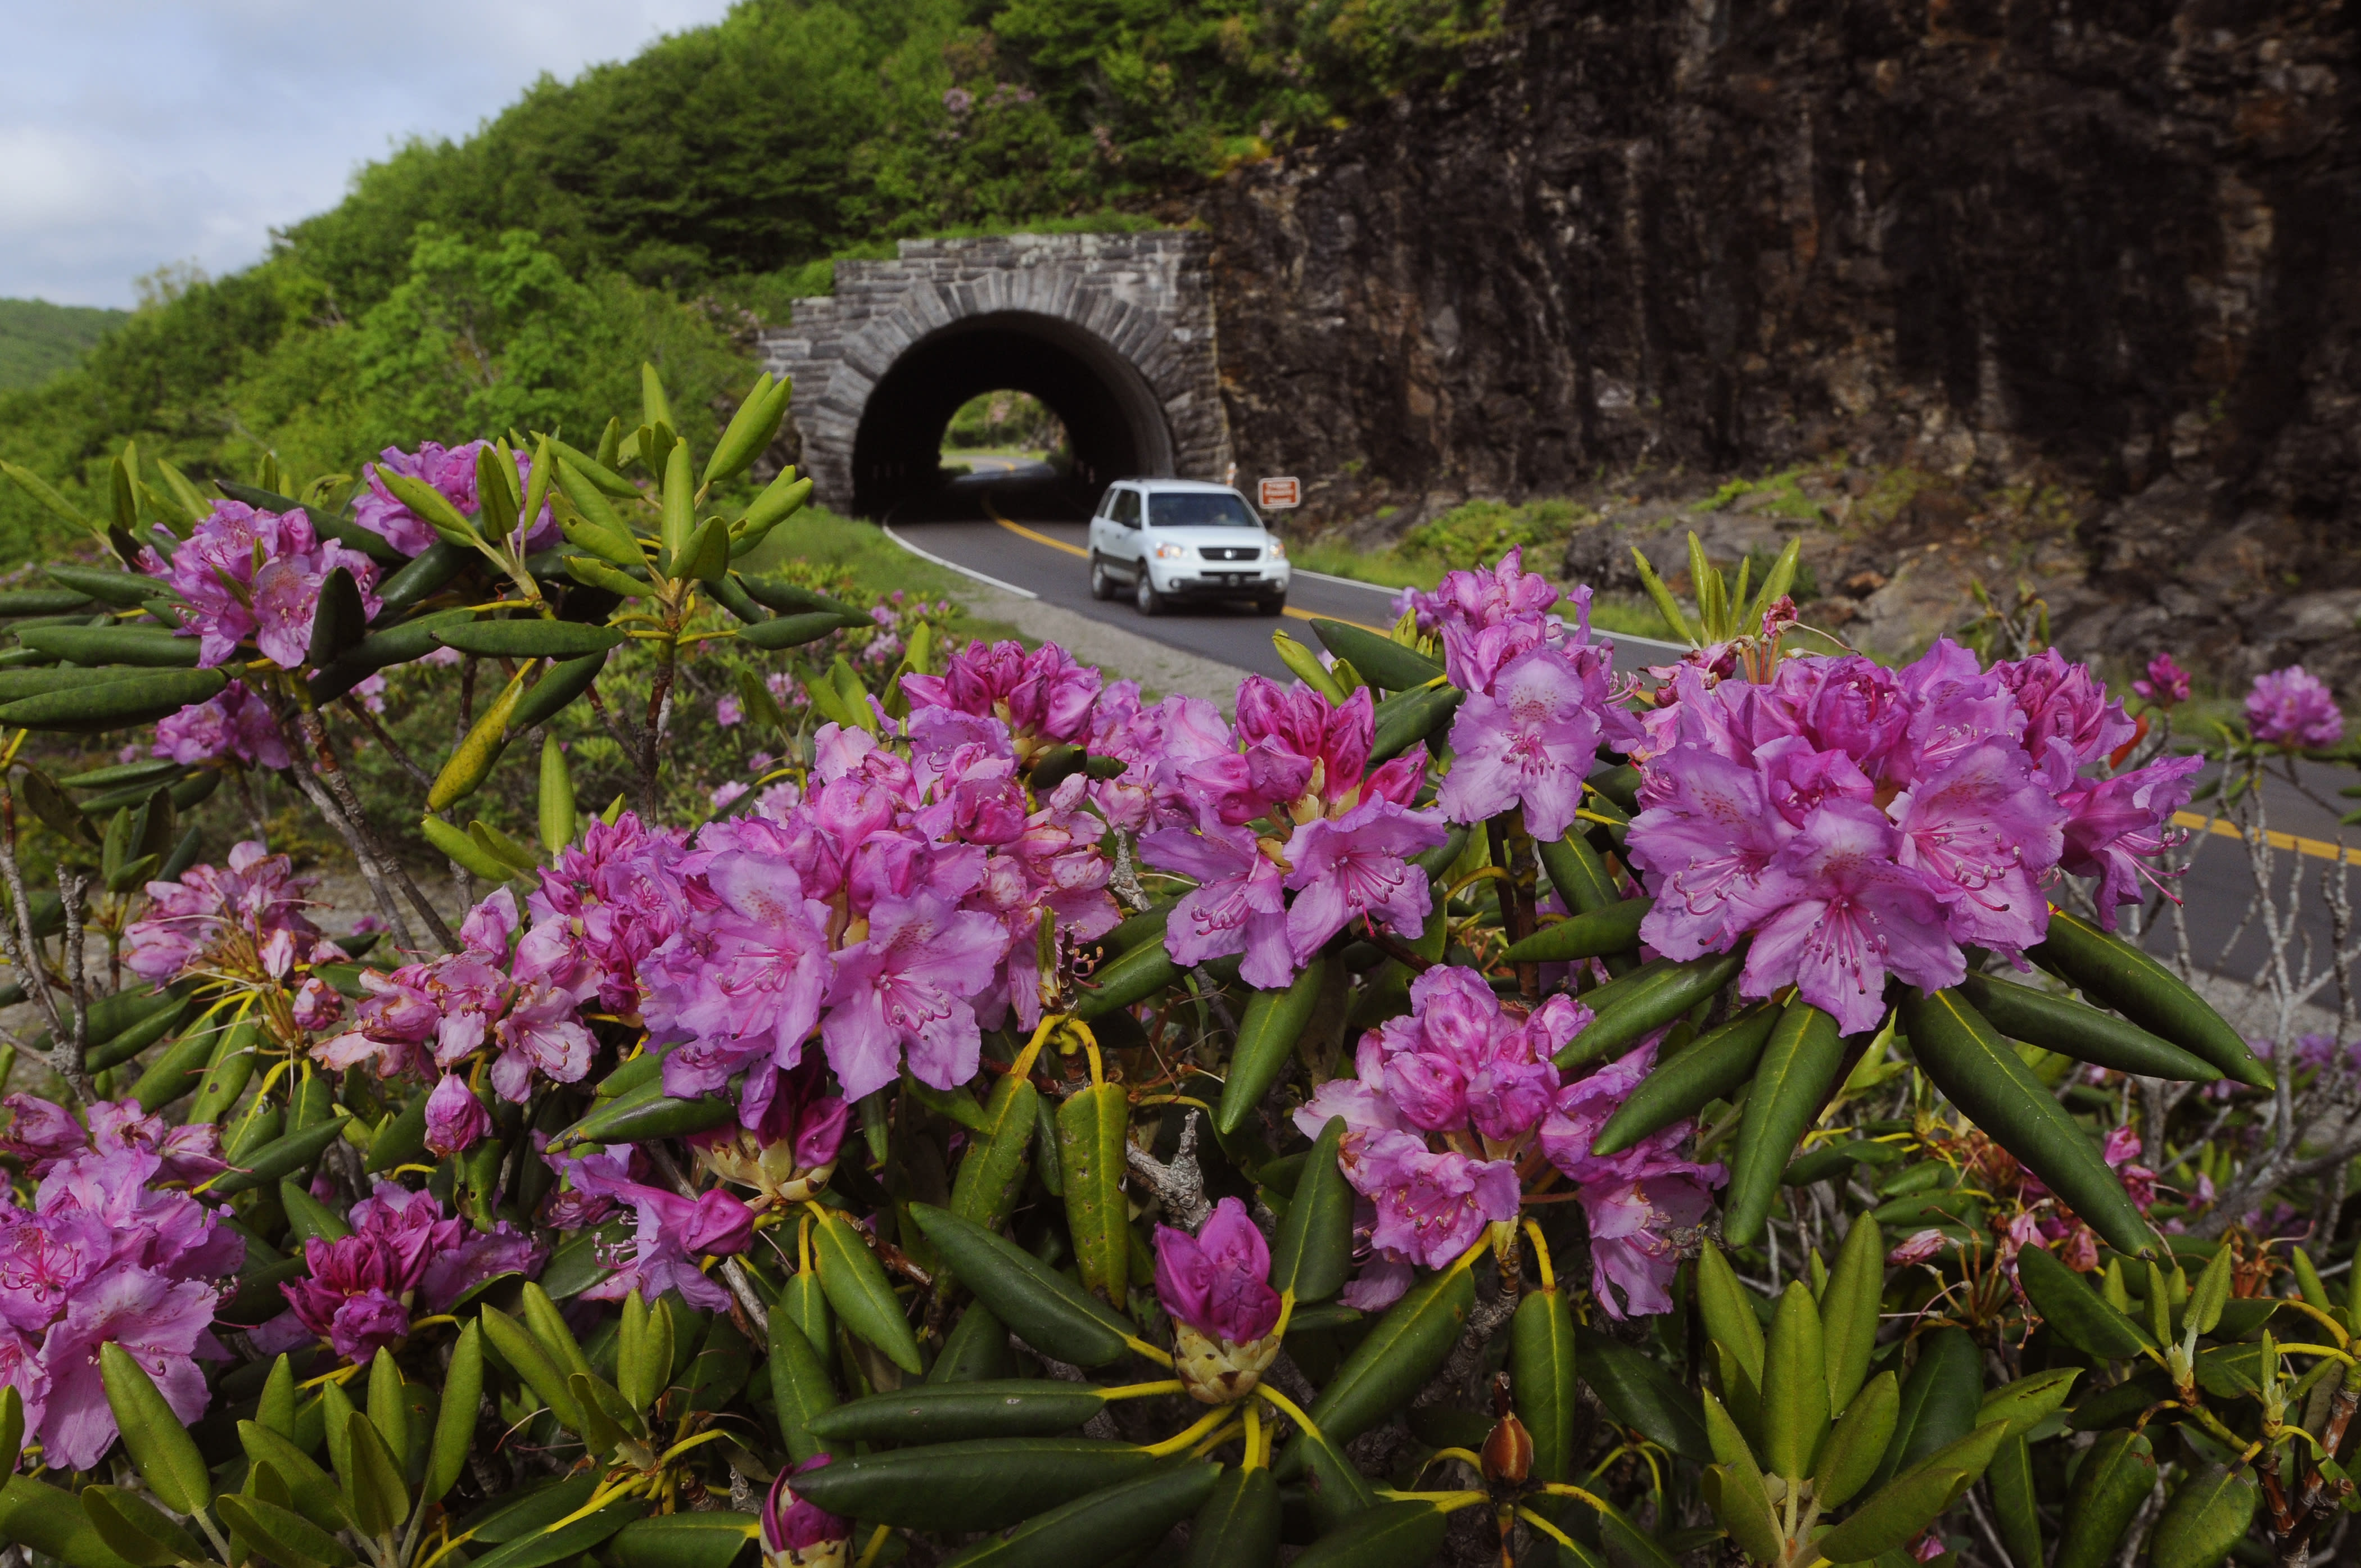 Blue Ridge Parkway Tunnel and Rhododendron